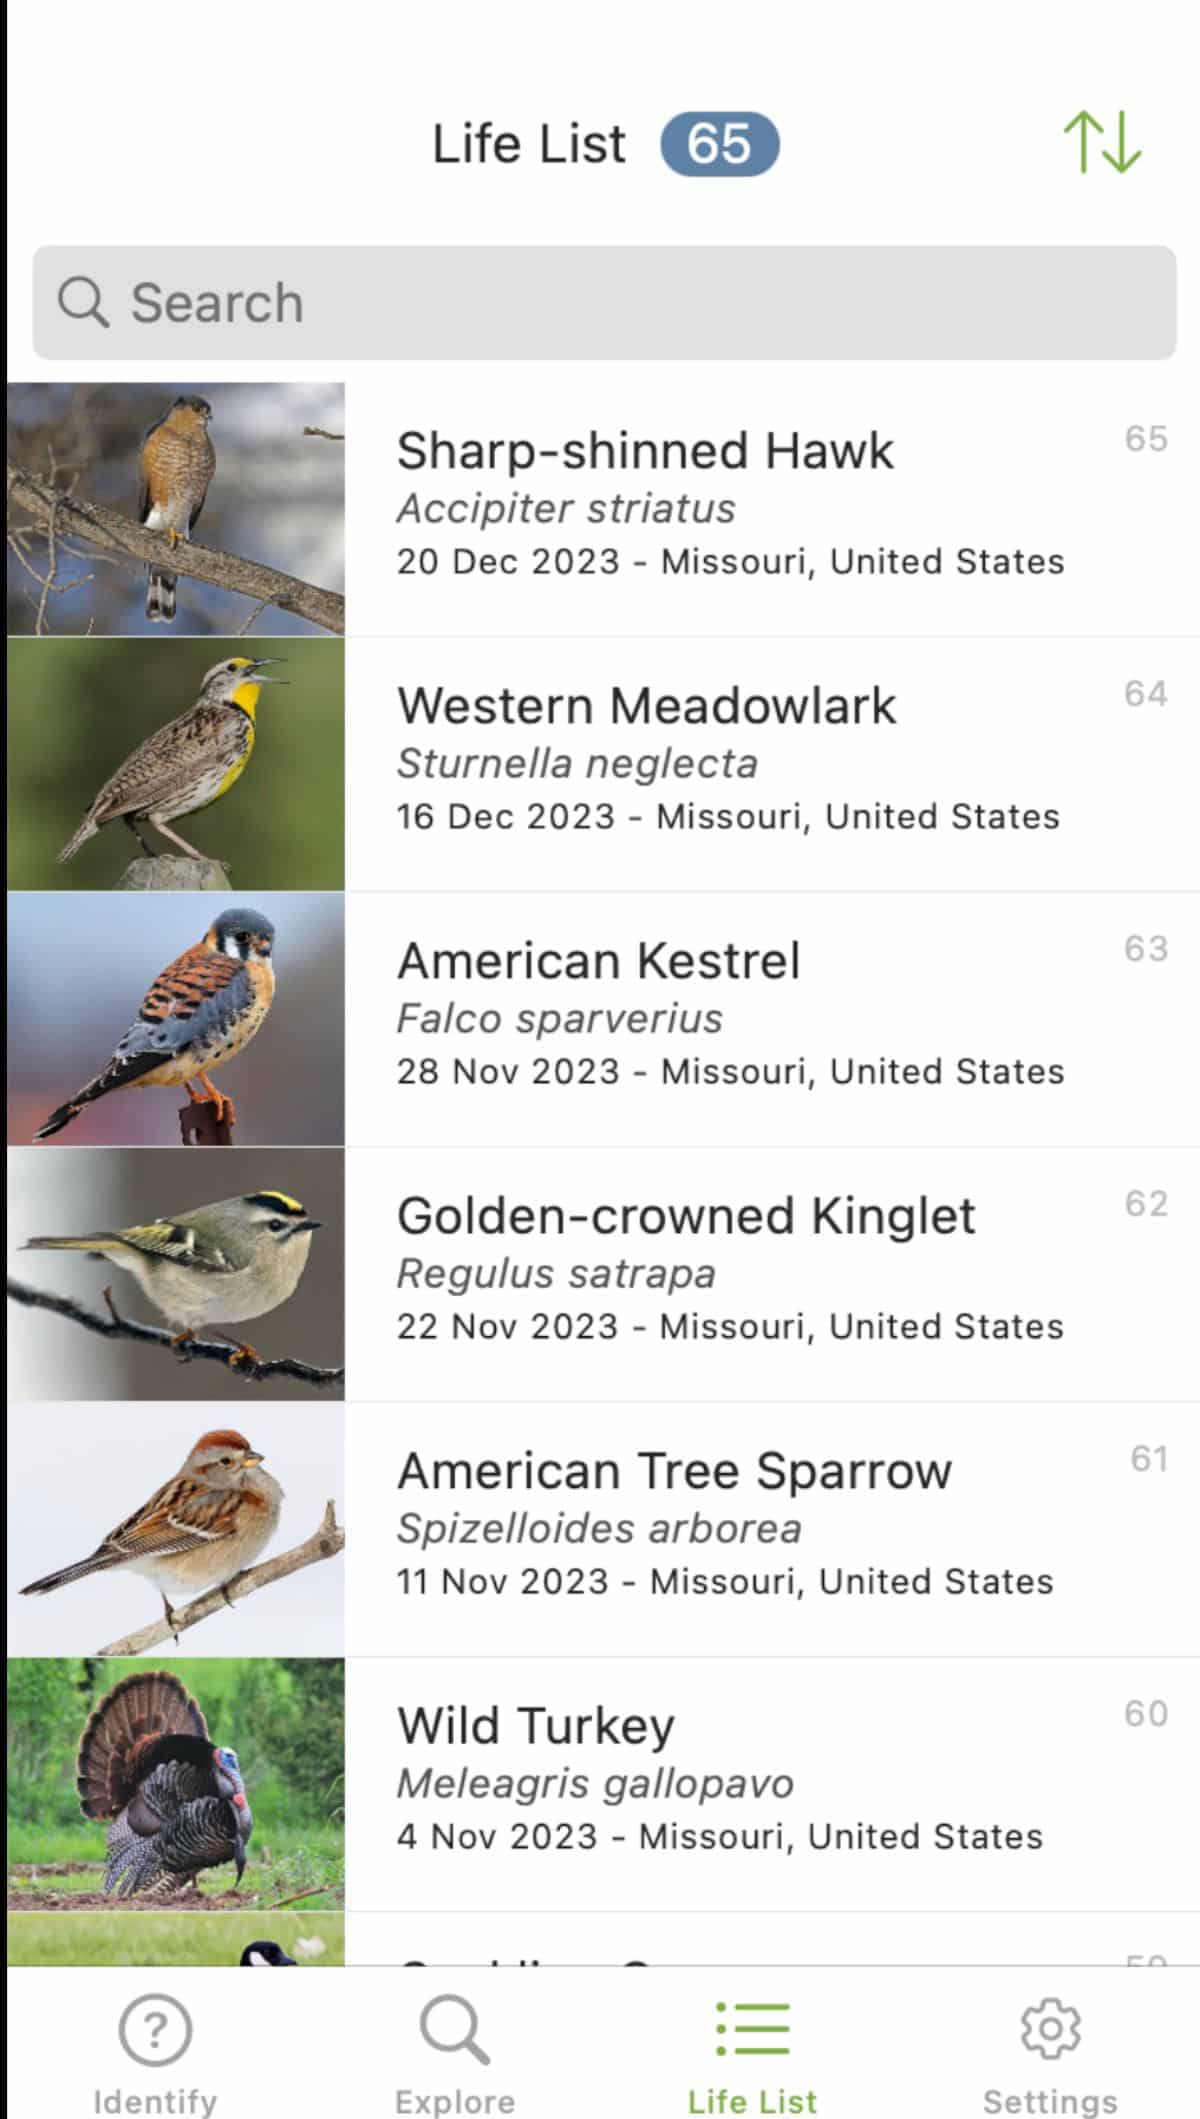 A Life List of spotted birds on the Merlin app